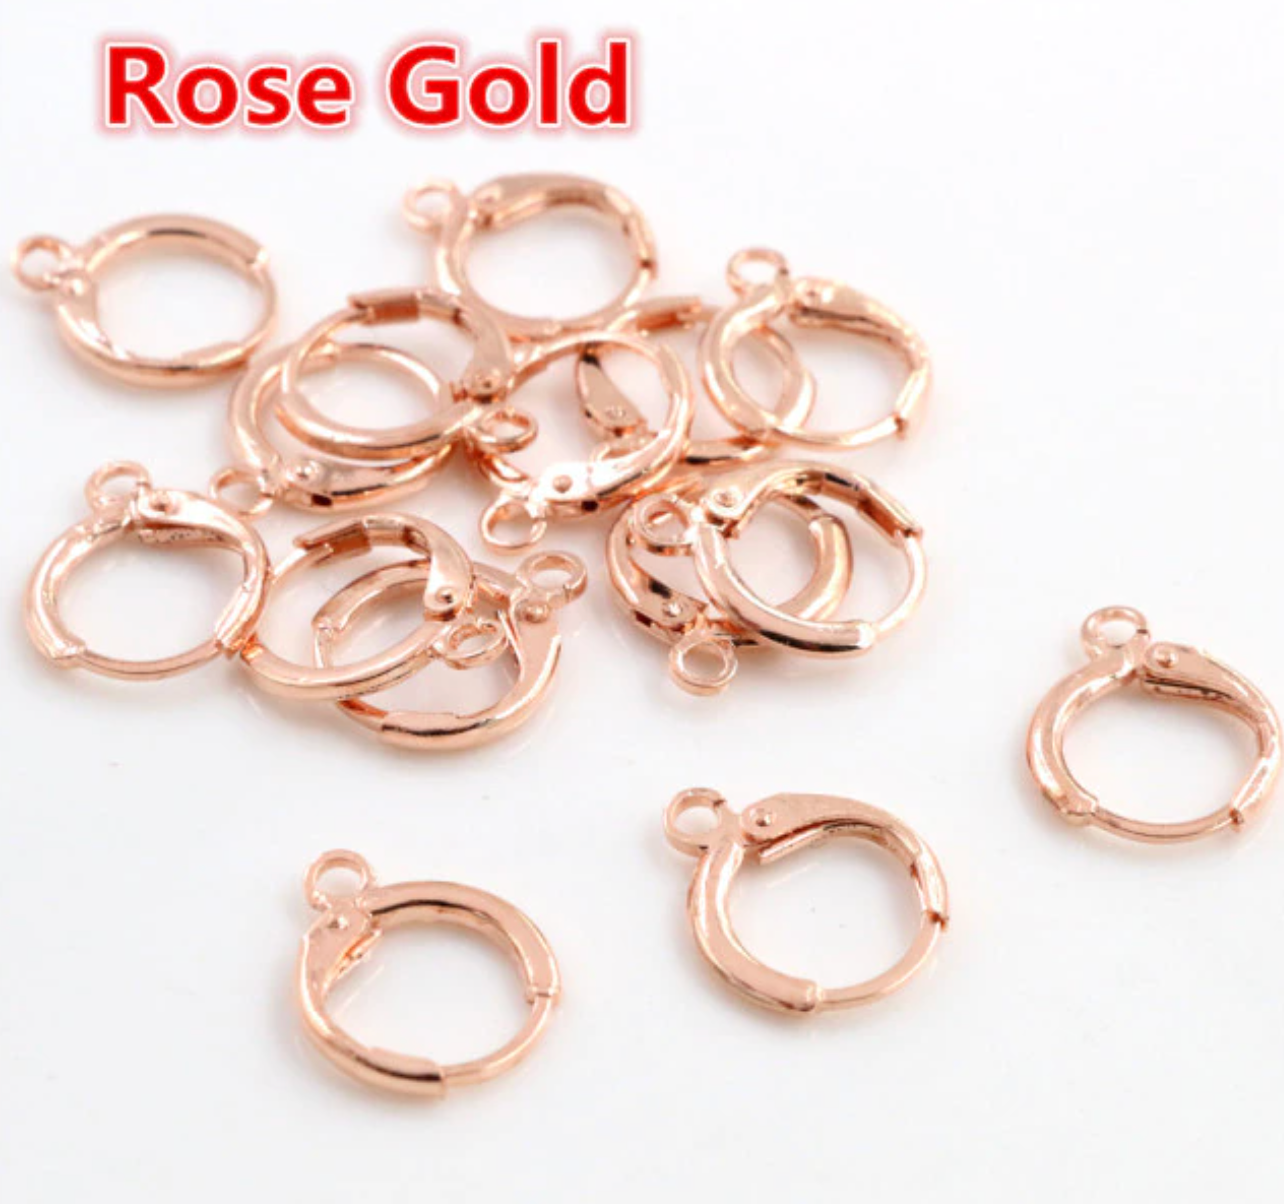 4pcs, 14x12mm,  High Quality Lead Free and Nickel Free Copper French Earwire Leverback earring - choose your colour